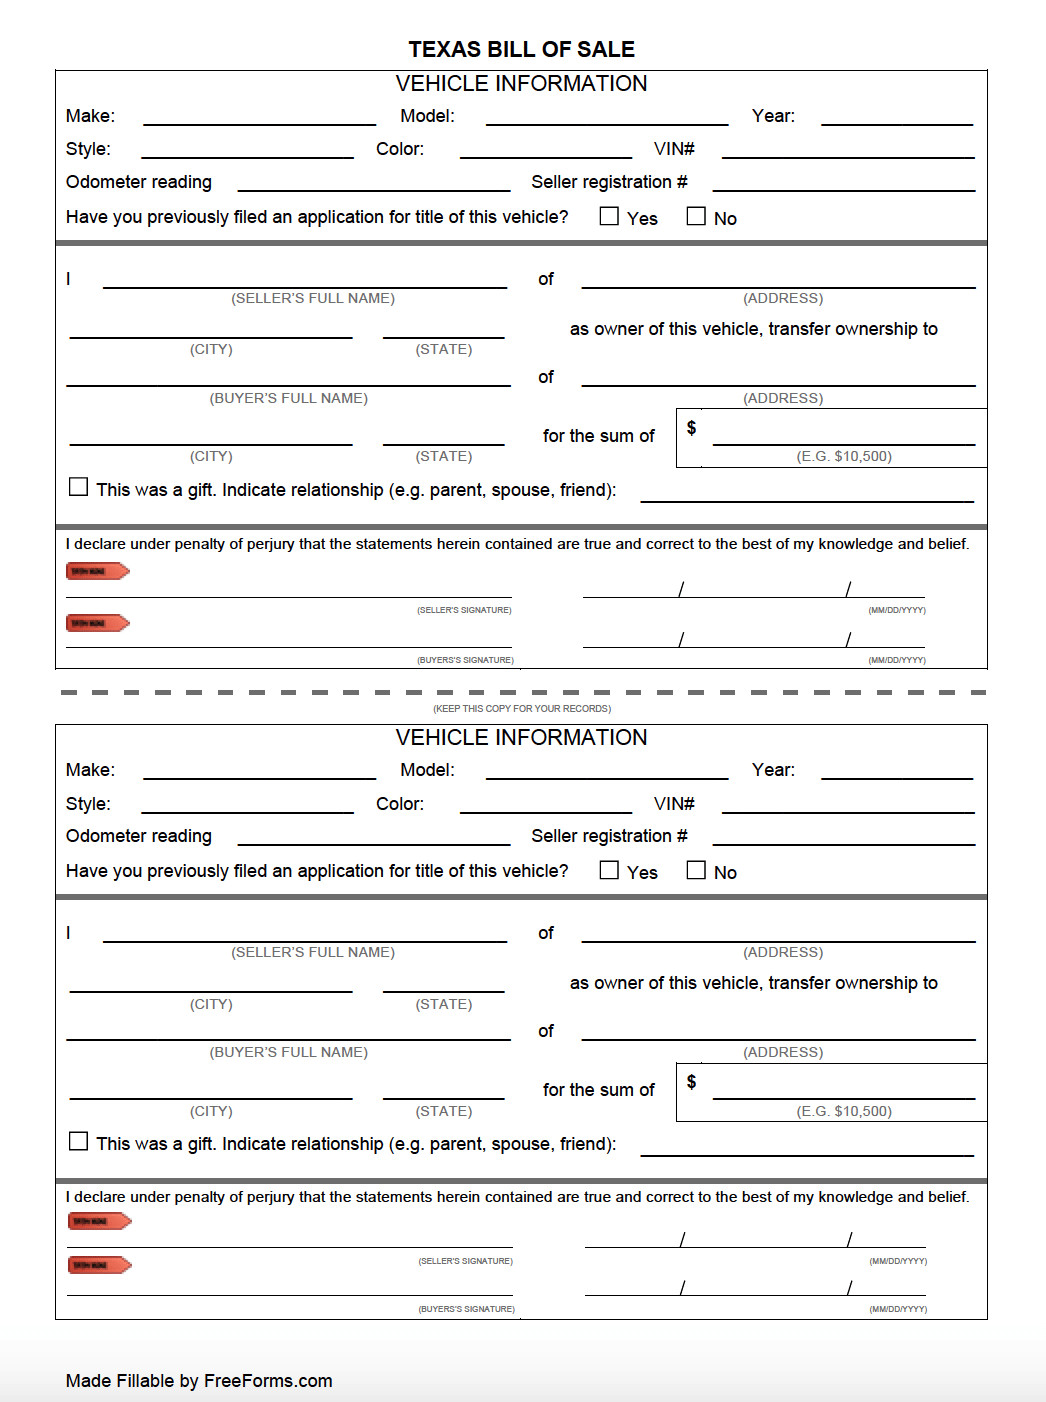 Bill Of Sale Template Texas Free Texas Bill Of Sale forms